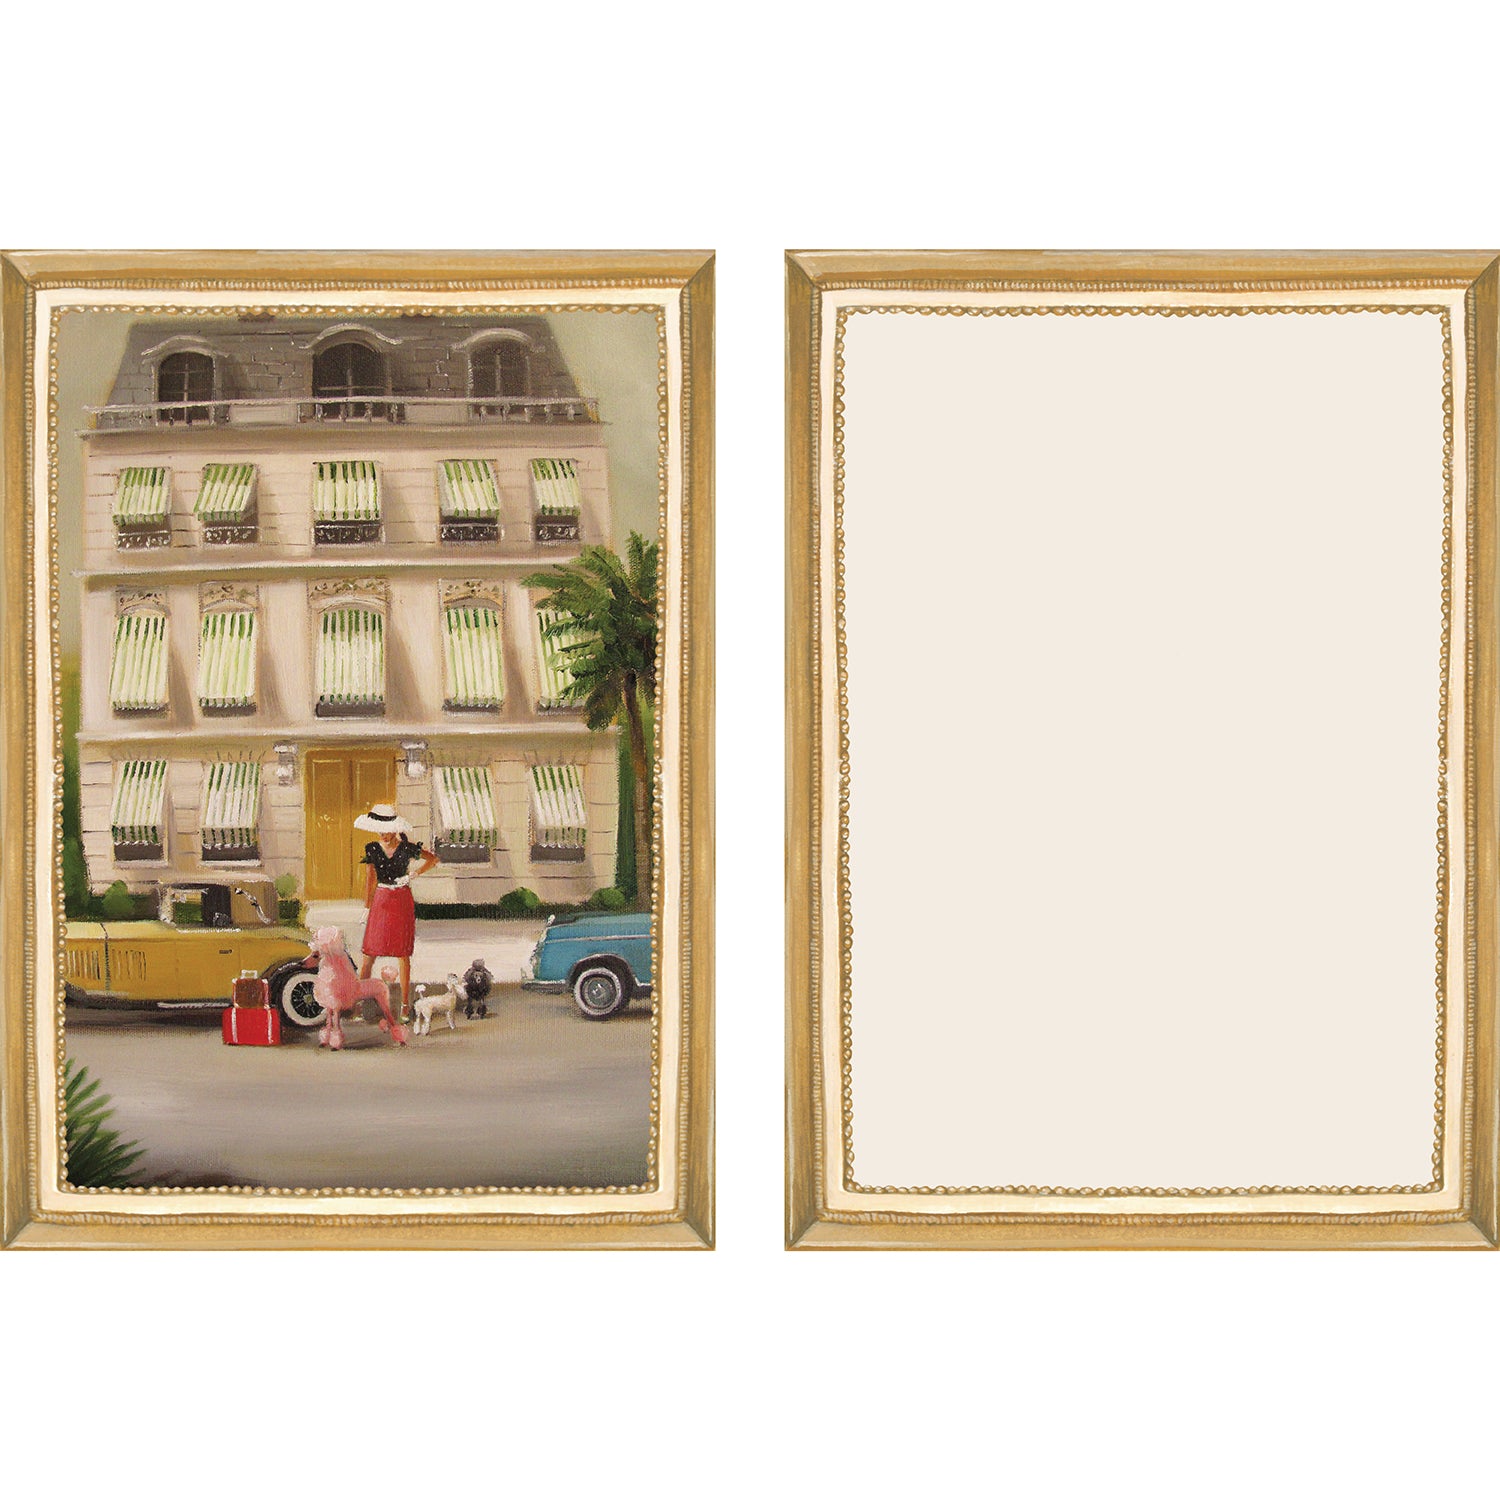 The illustrated front and blank back of a Flat Note, both sides framed in gold, featuring a painterly illustration of a woman standing outside a tall townhome with her suitcase and three dogs.